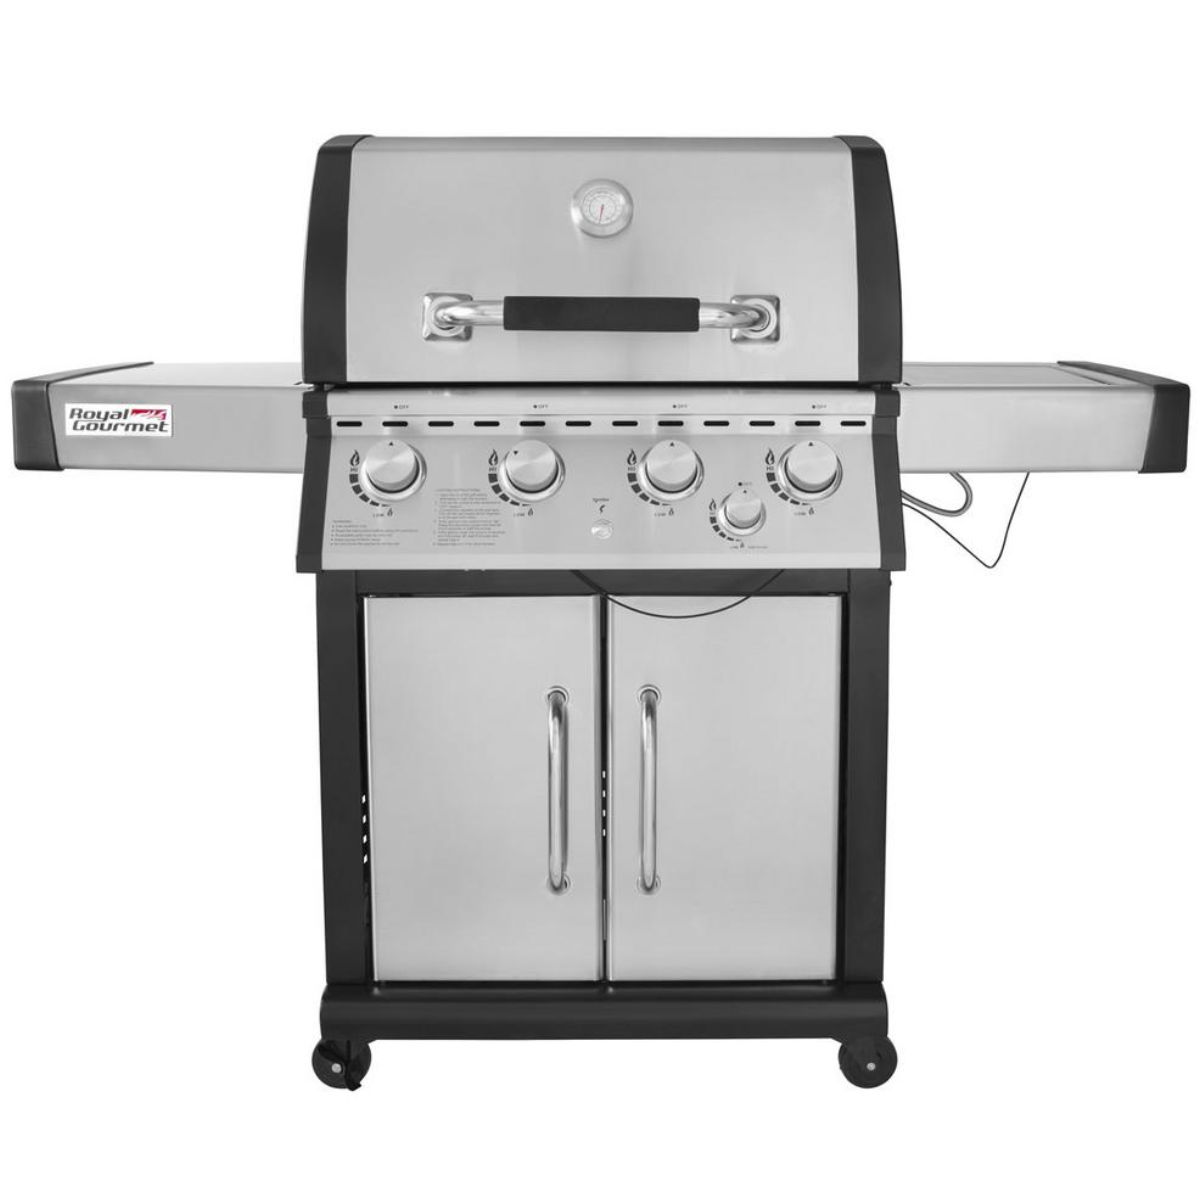 Royal Gourmet MG4001 Deluxe 4-Burner Patio Propane Gas Grill